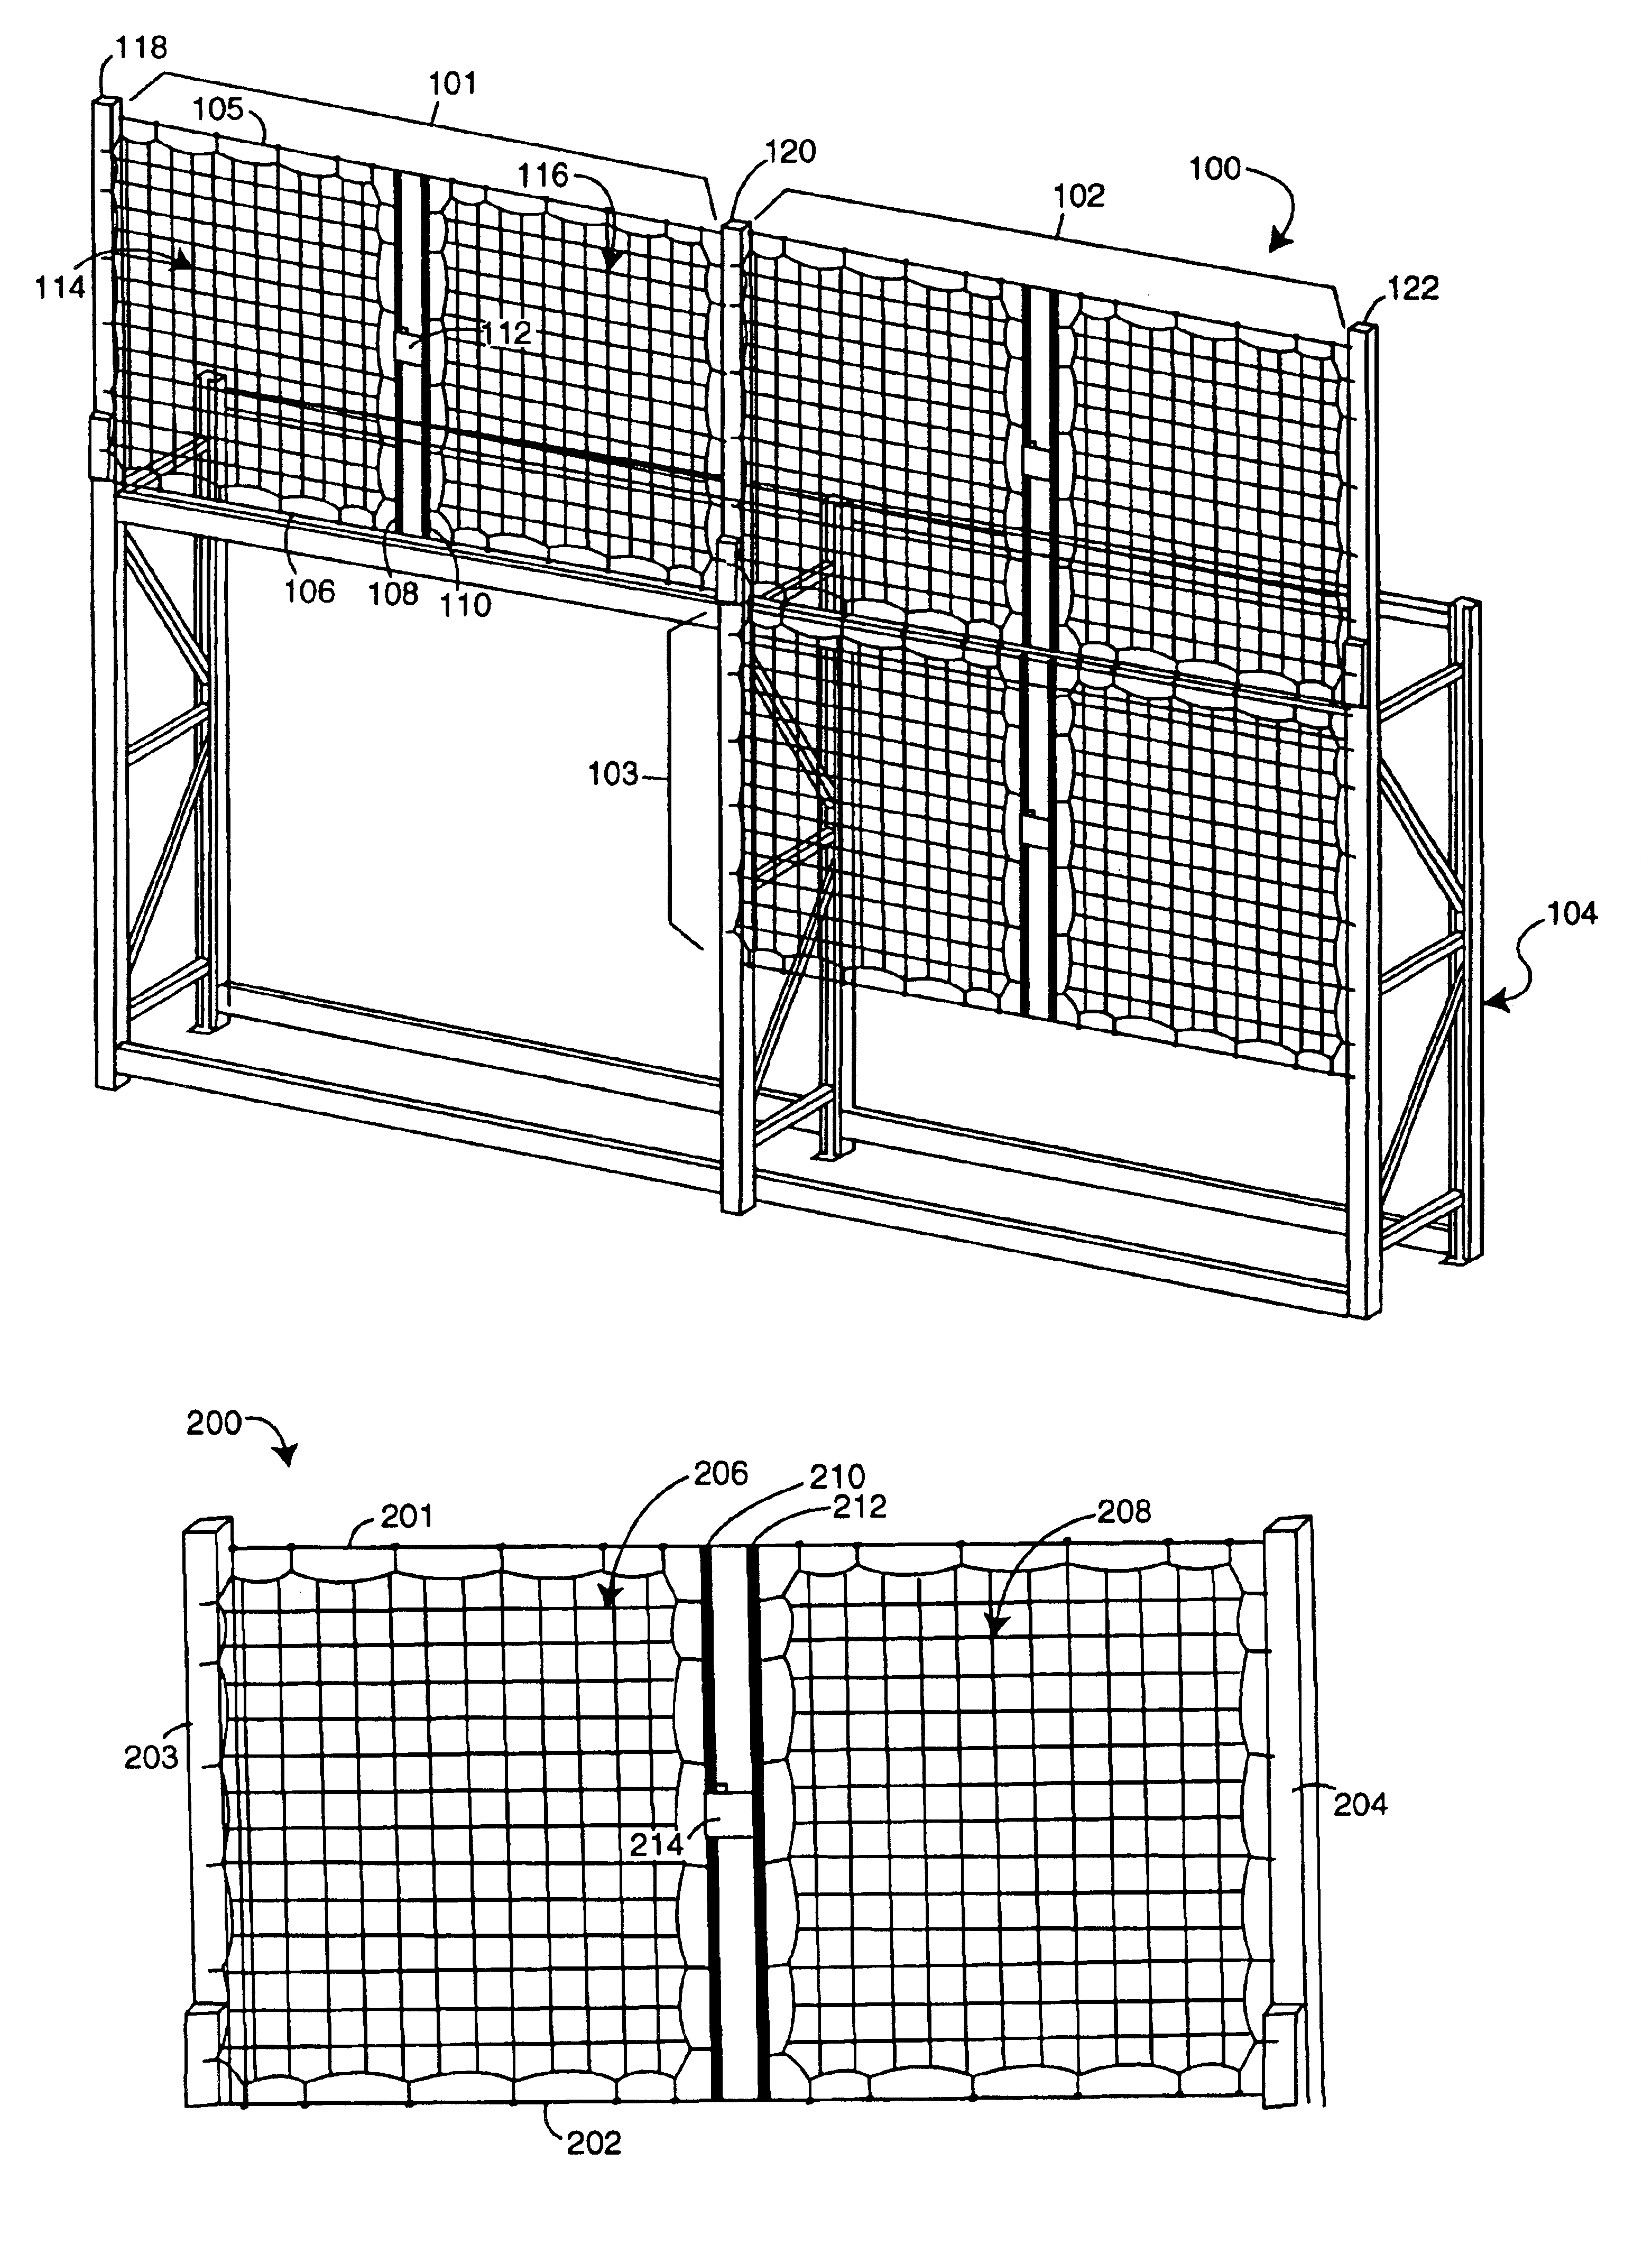 Warehouse pallet-rack safety netting system